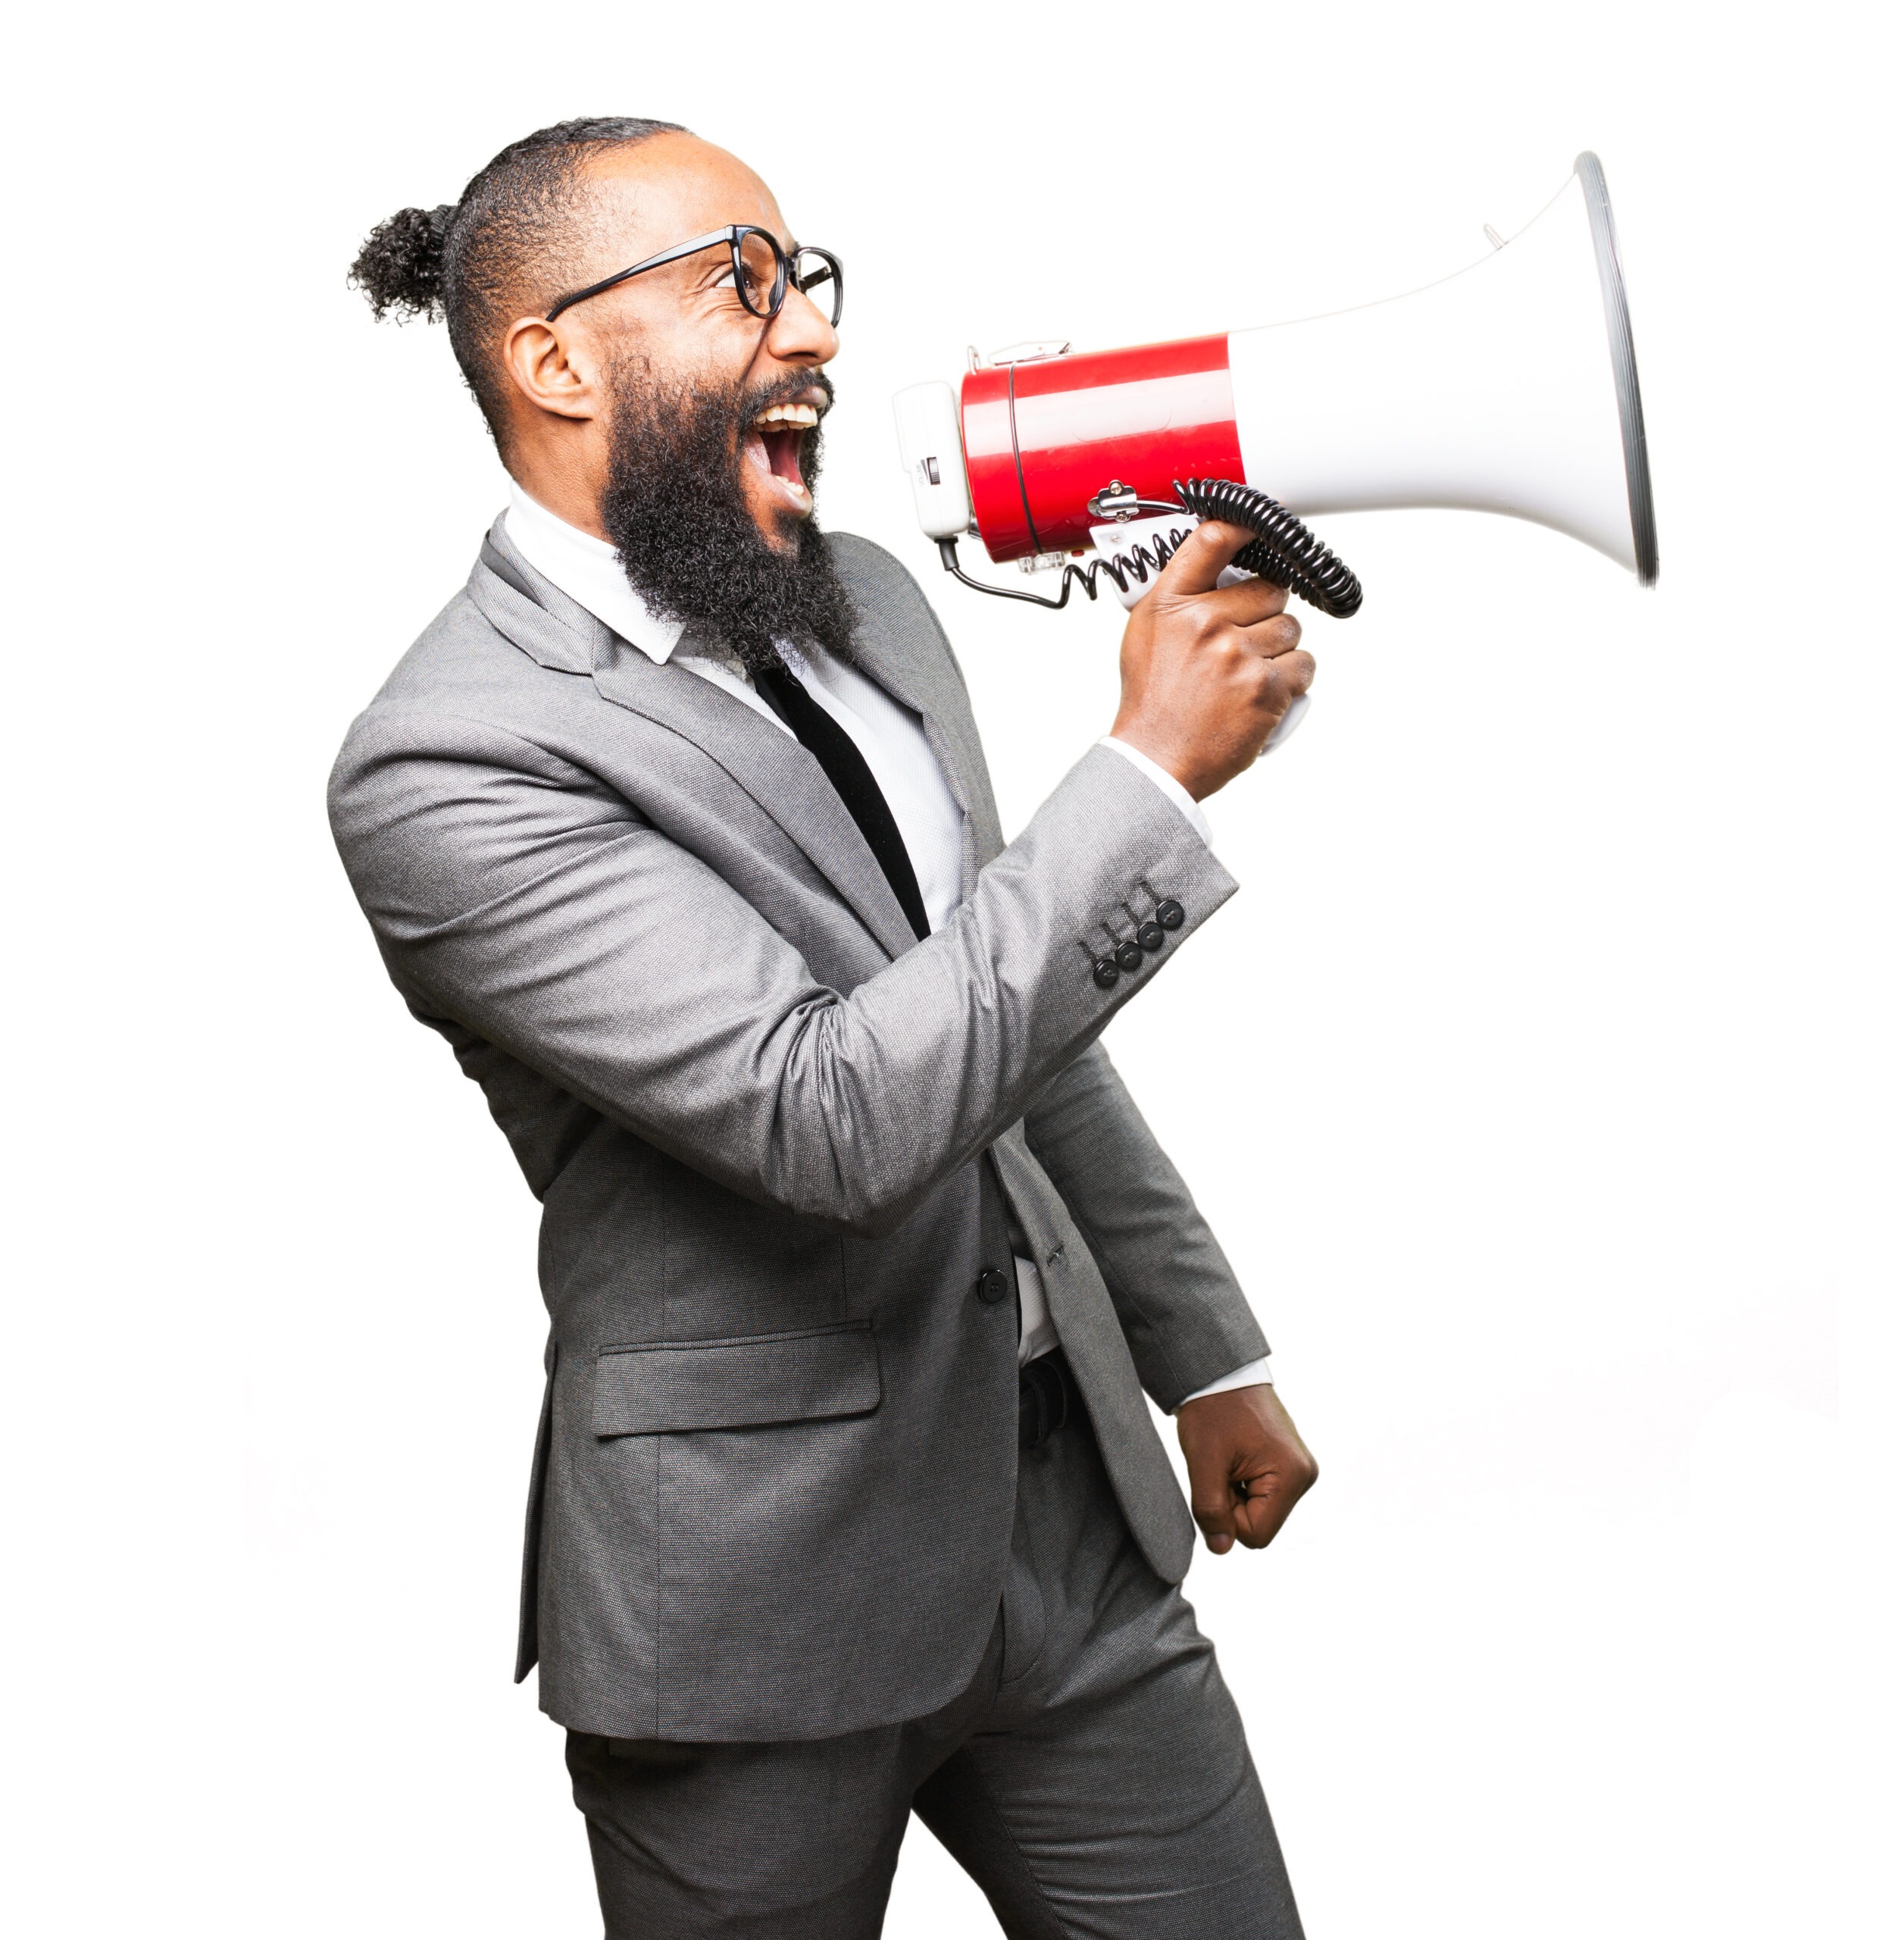 Young male adult in a suit using a megaphone